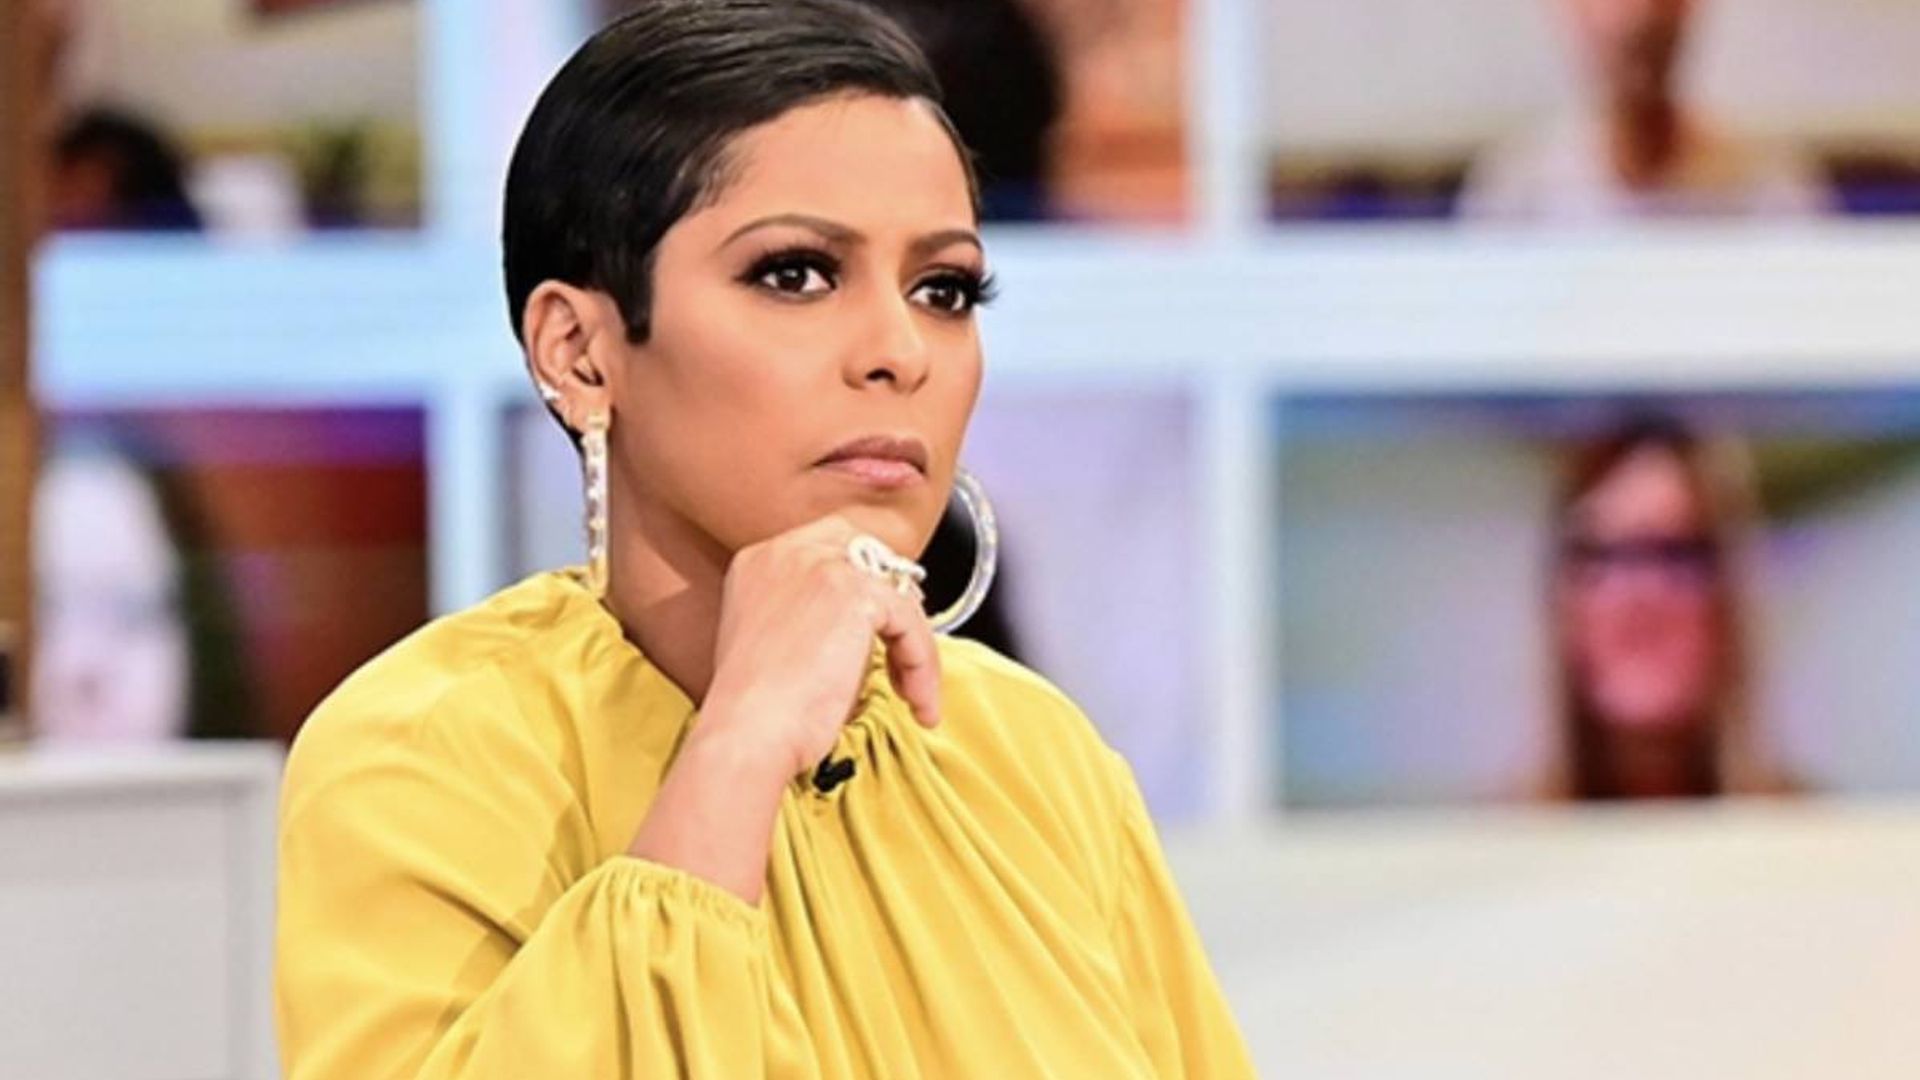 Tamron Hall stuns in a dreamy yellow dress perfect for spring - and we found the best dupe